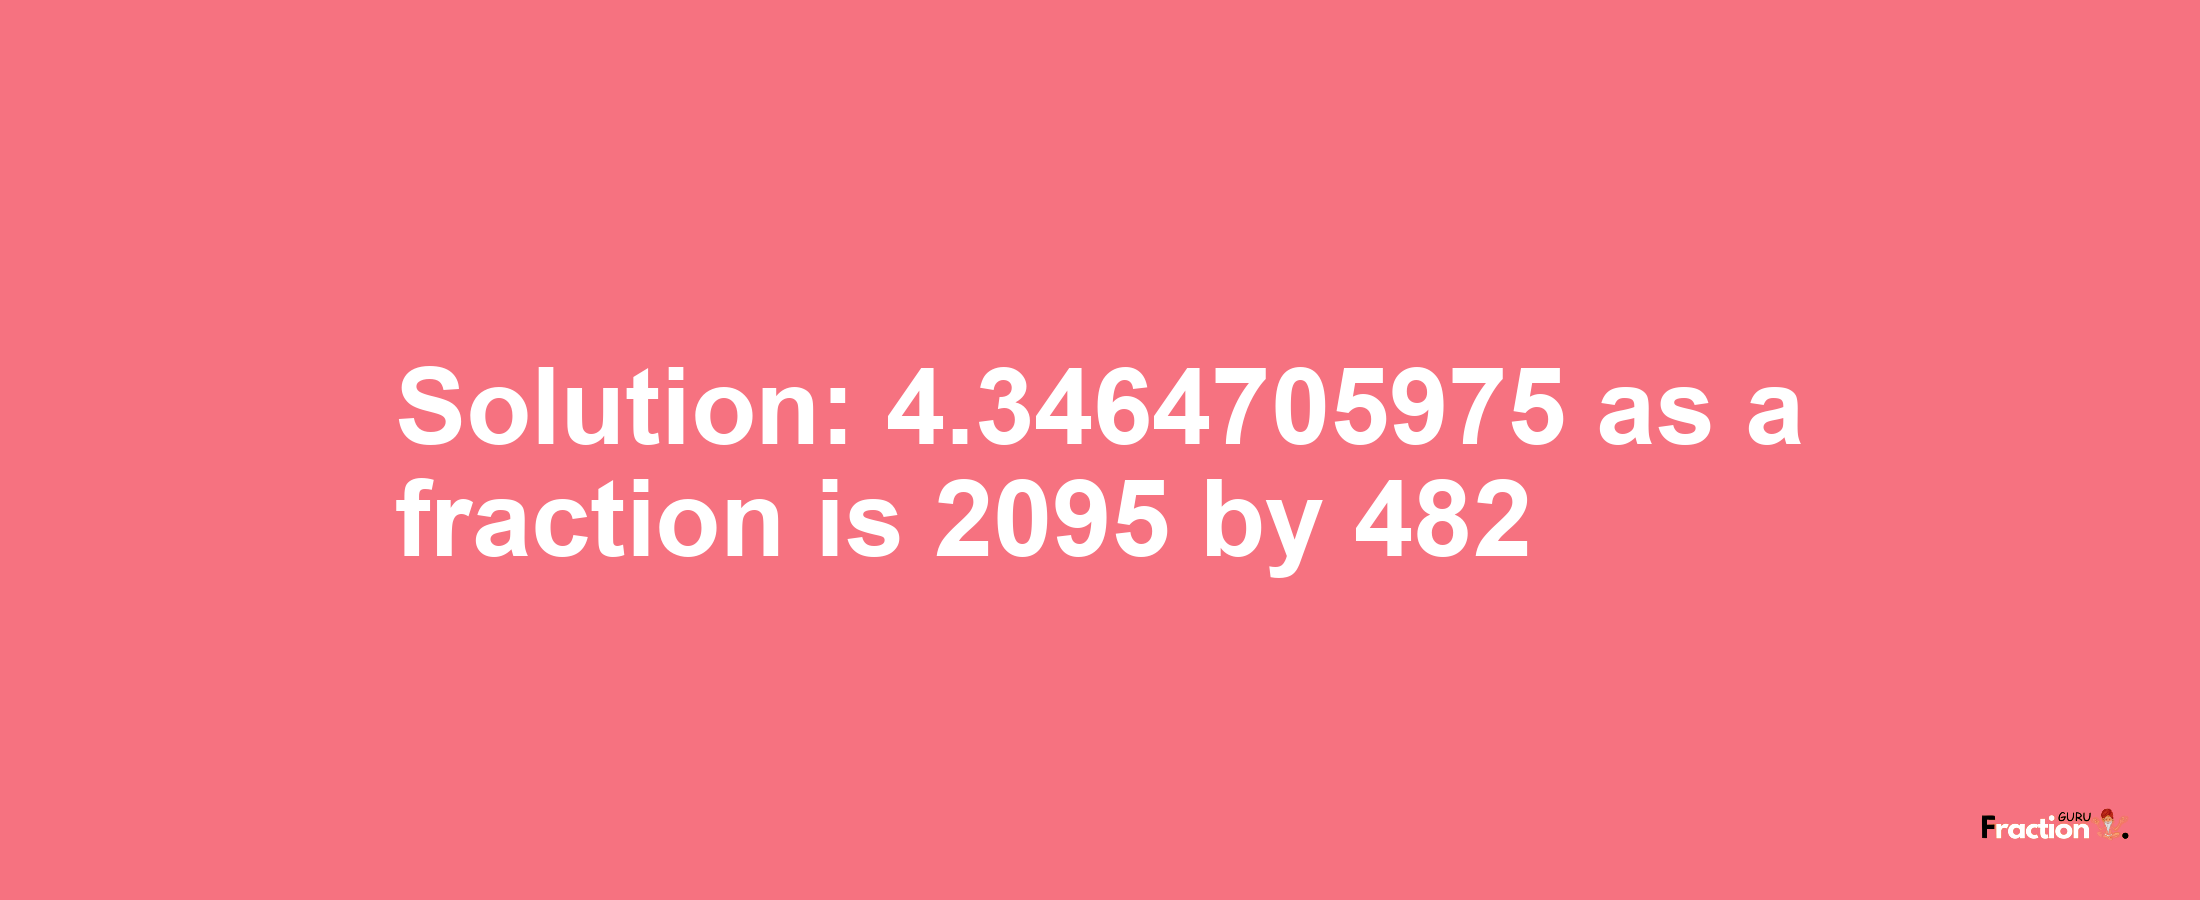 Solution:4.3464705975 as a fraction is 2095/482